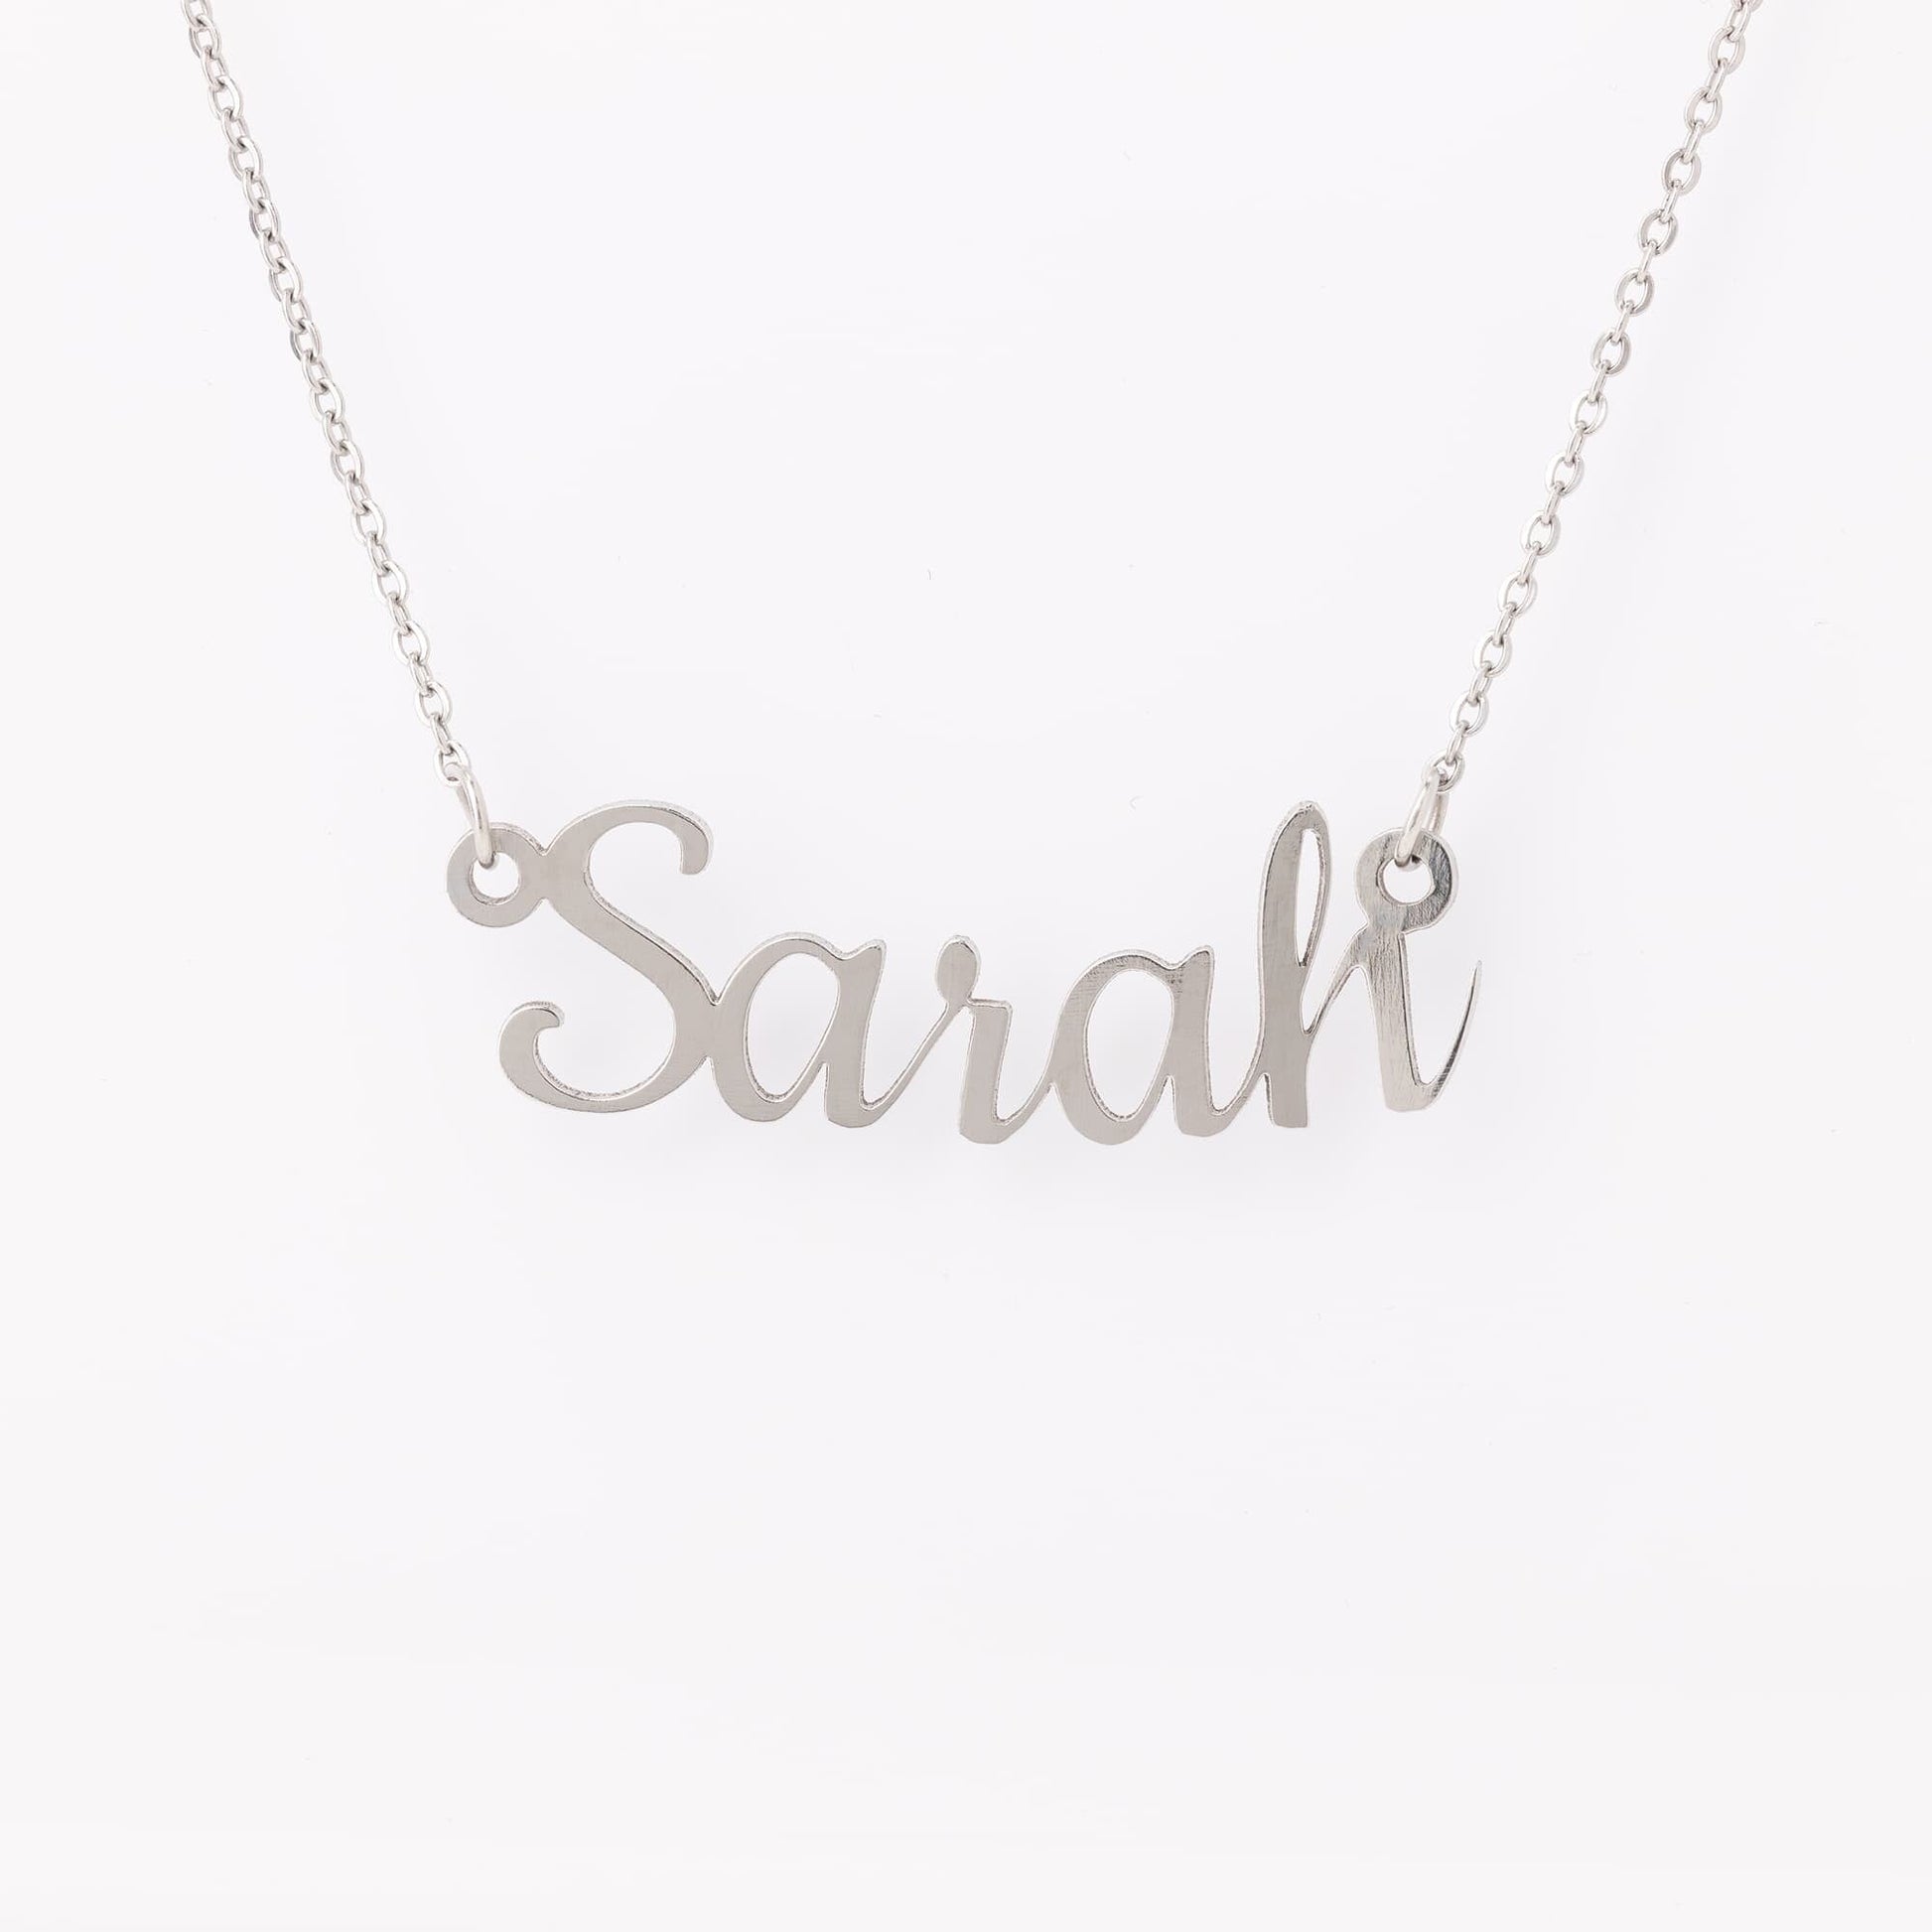 Kate McEnroe New York Personalized 18k Gold Name Necklace Jewelry